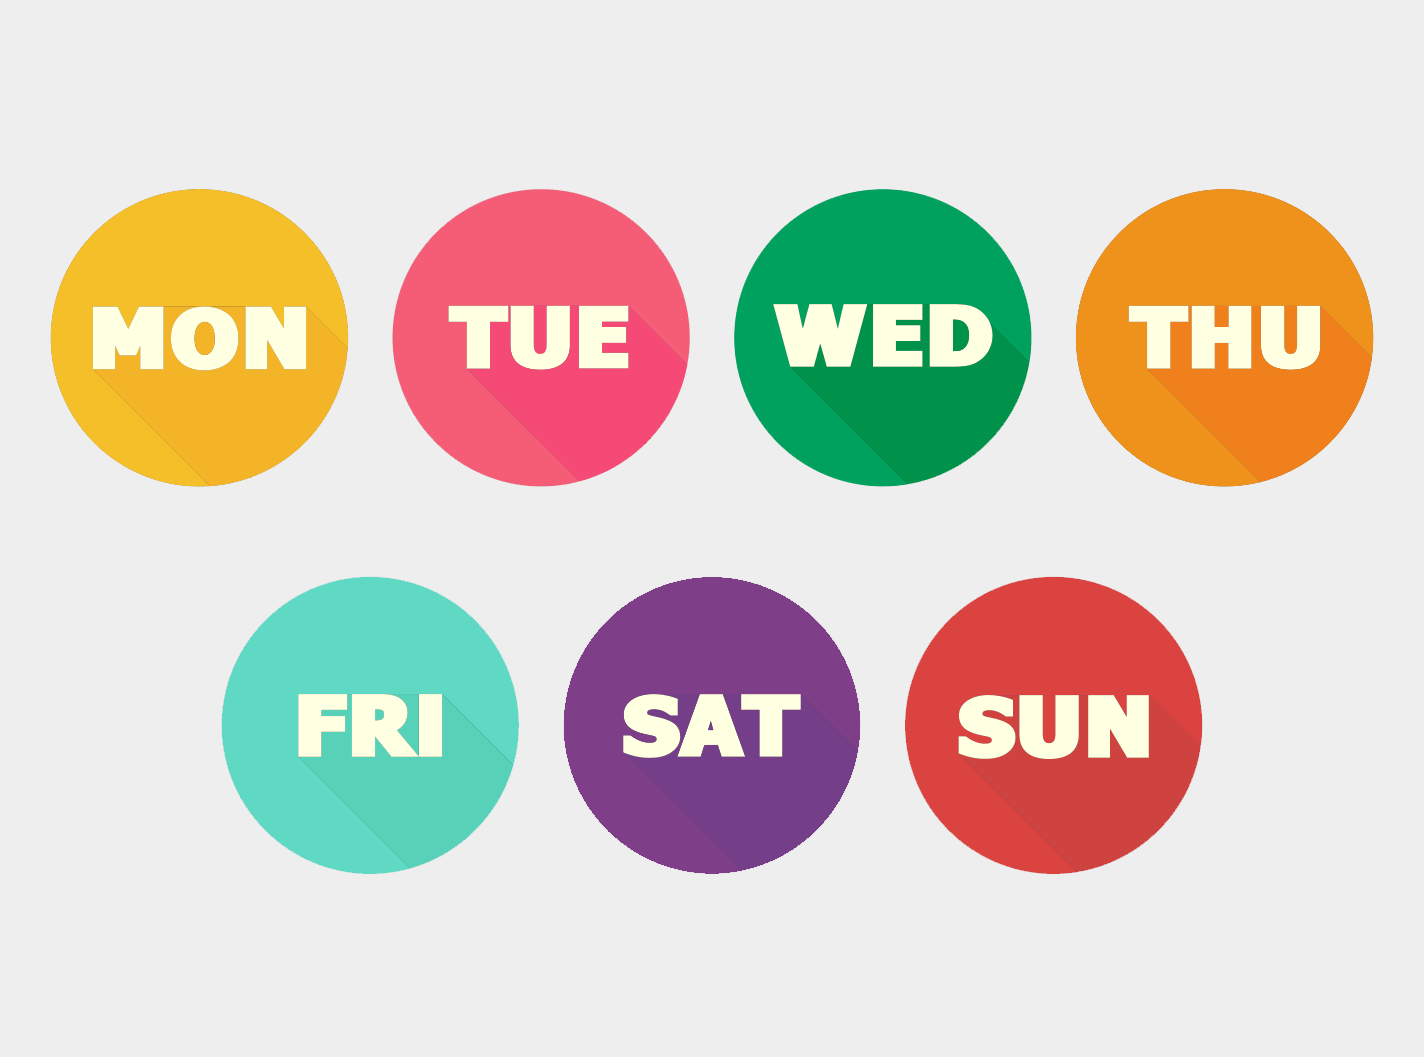 Days of the Week in Hebrew